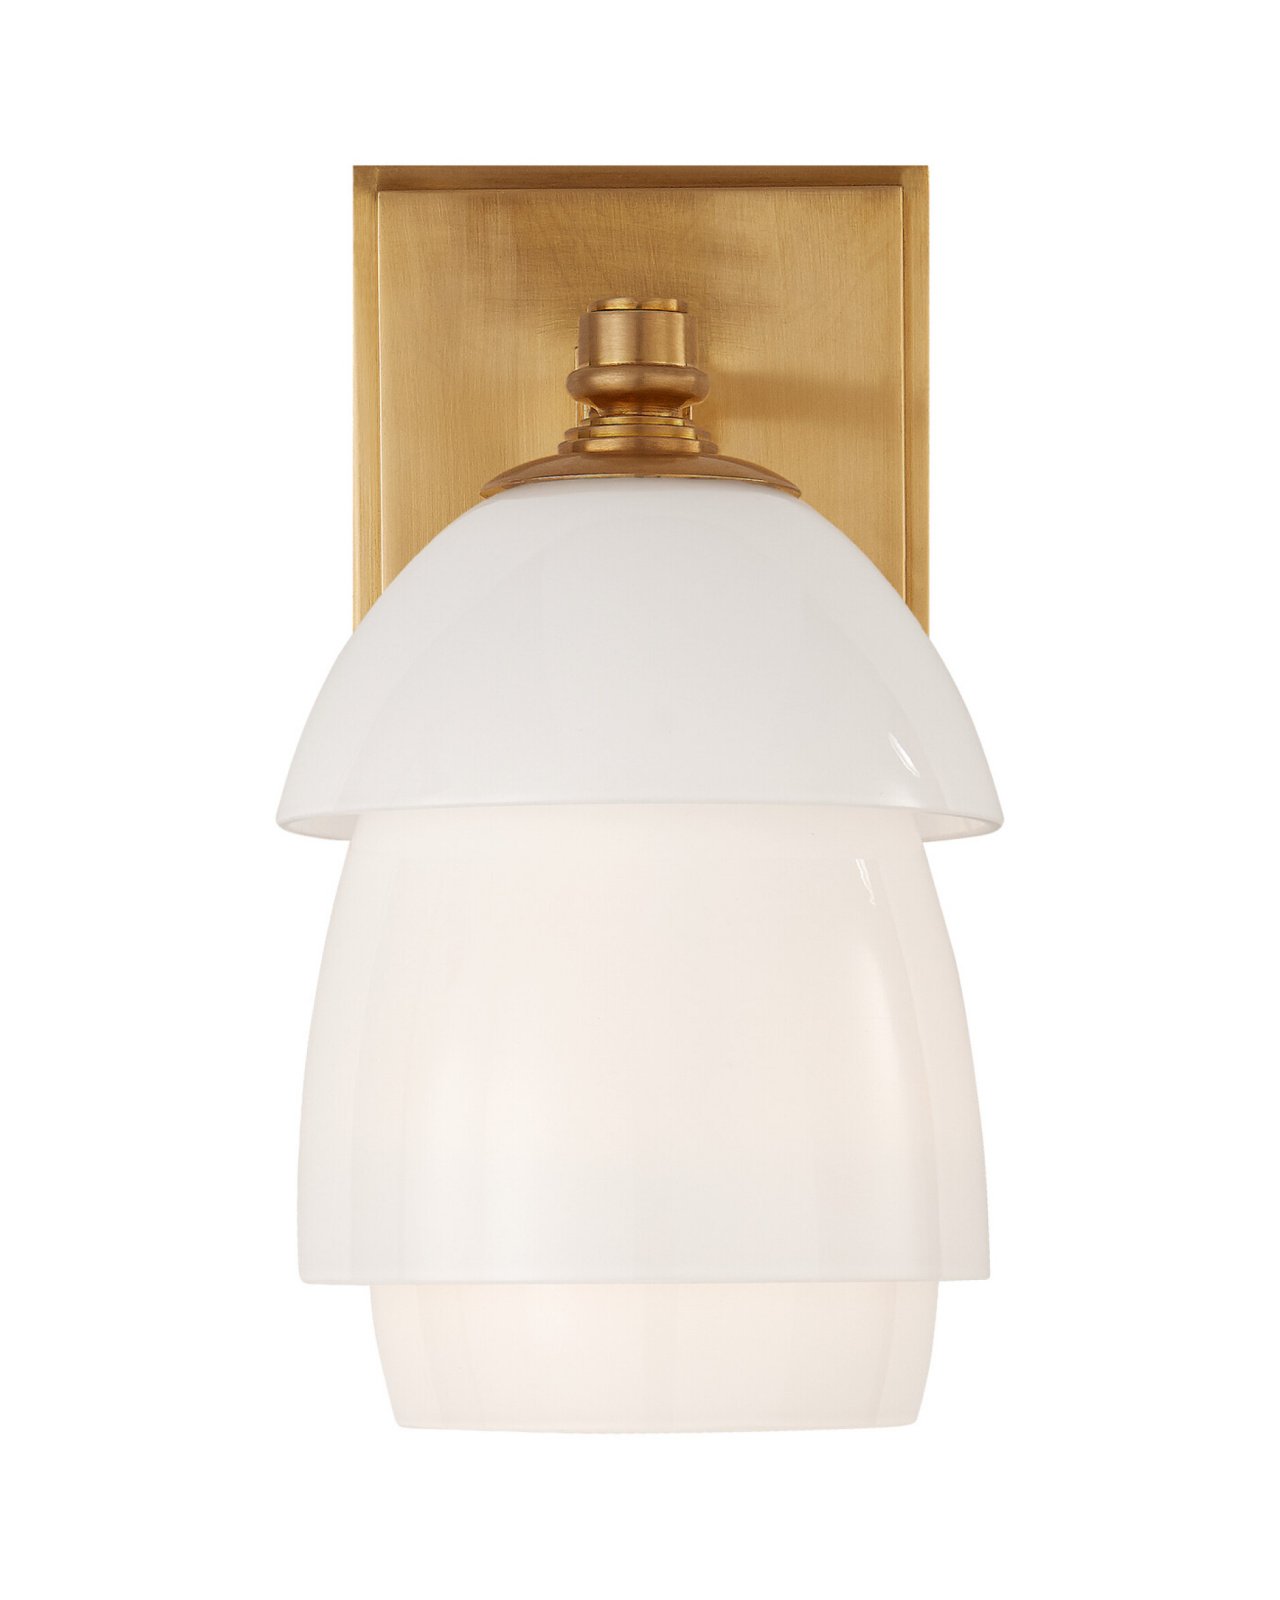 Whitman Sconce Antique Brass/White Small